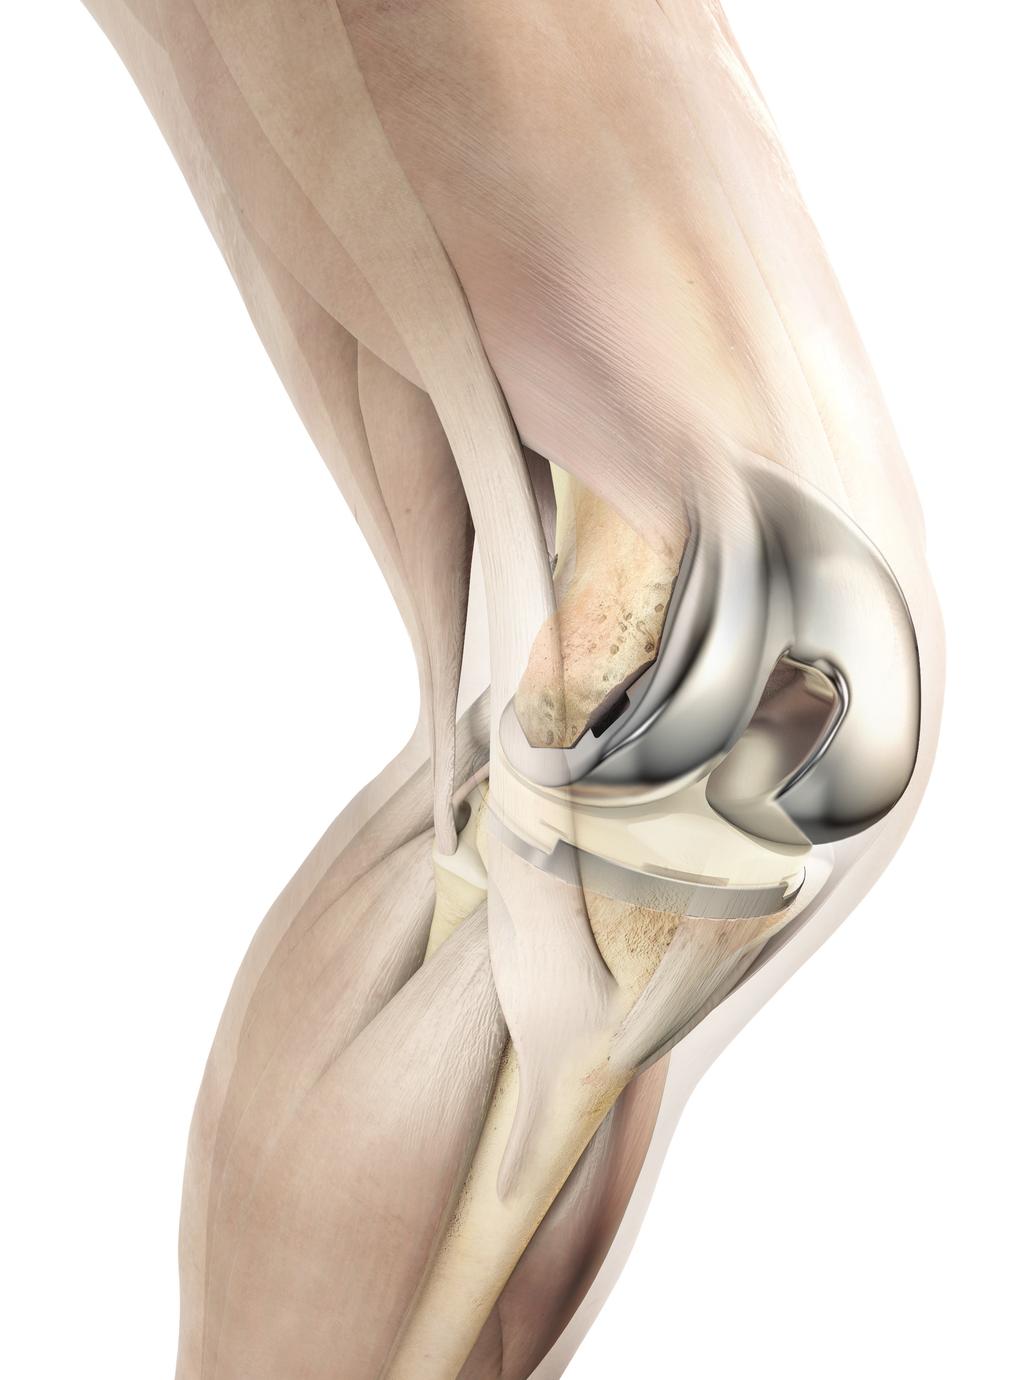 What makes the development of the ATTUNE Knee System different?